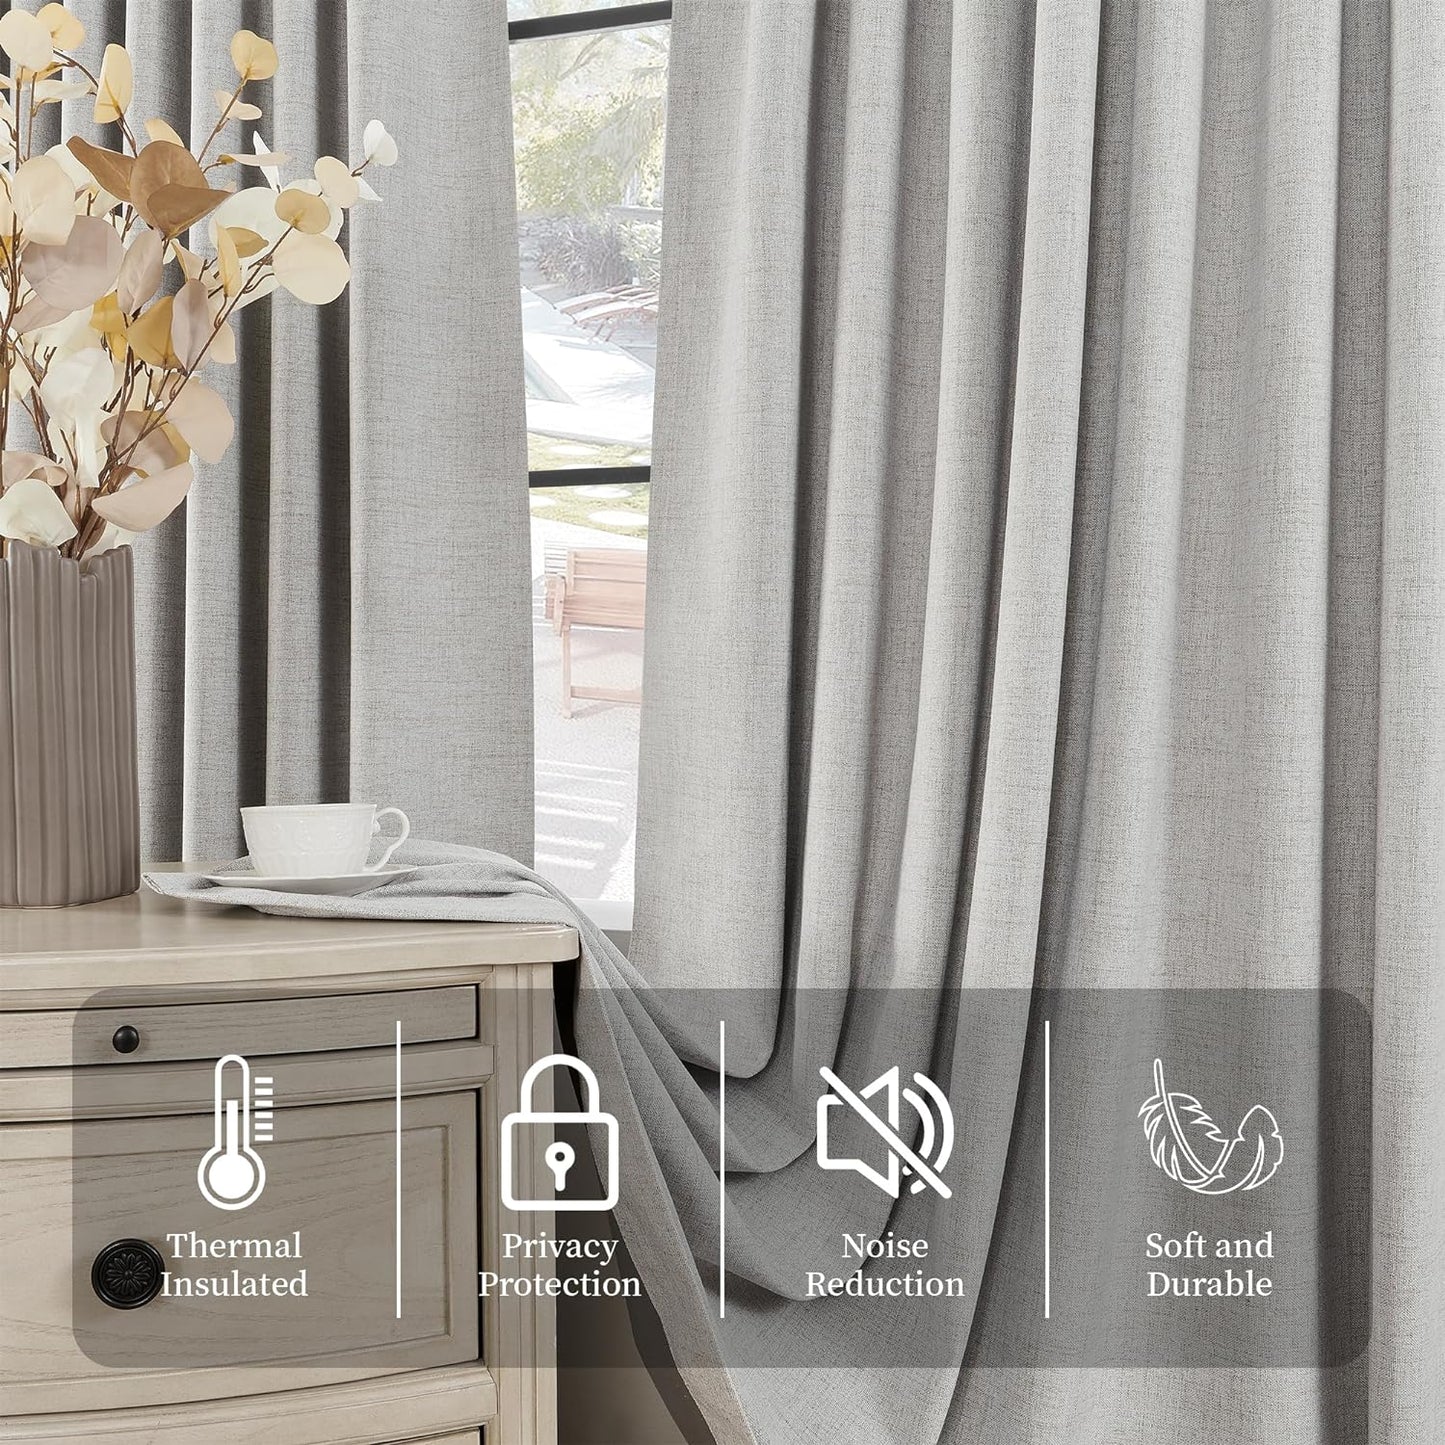 Cniuyhi Full Blackout Curtains Back Tab Pinch Pleat Curtains 108 Inches Long for Living Room, Natural Linen Blended Thermal Insulated Patio Door Pleated Drapes with Hooks, 40" W X 108" L, 1 Panel  Cniuyhi   